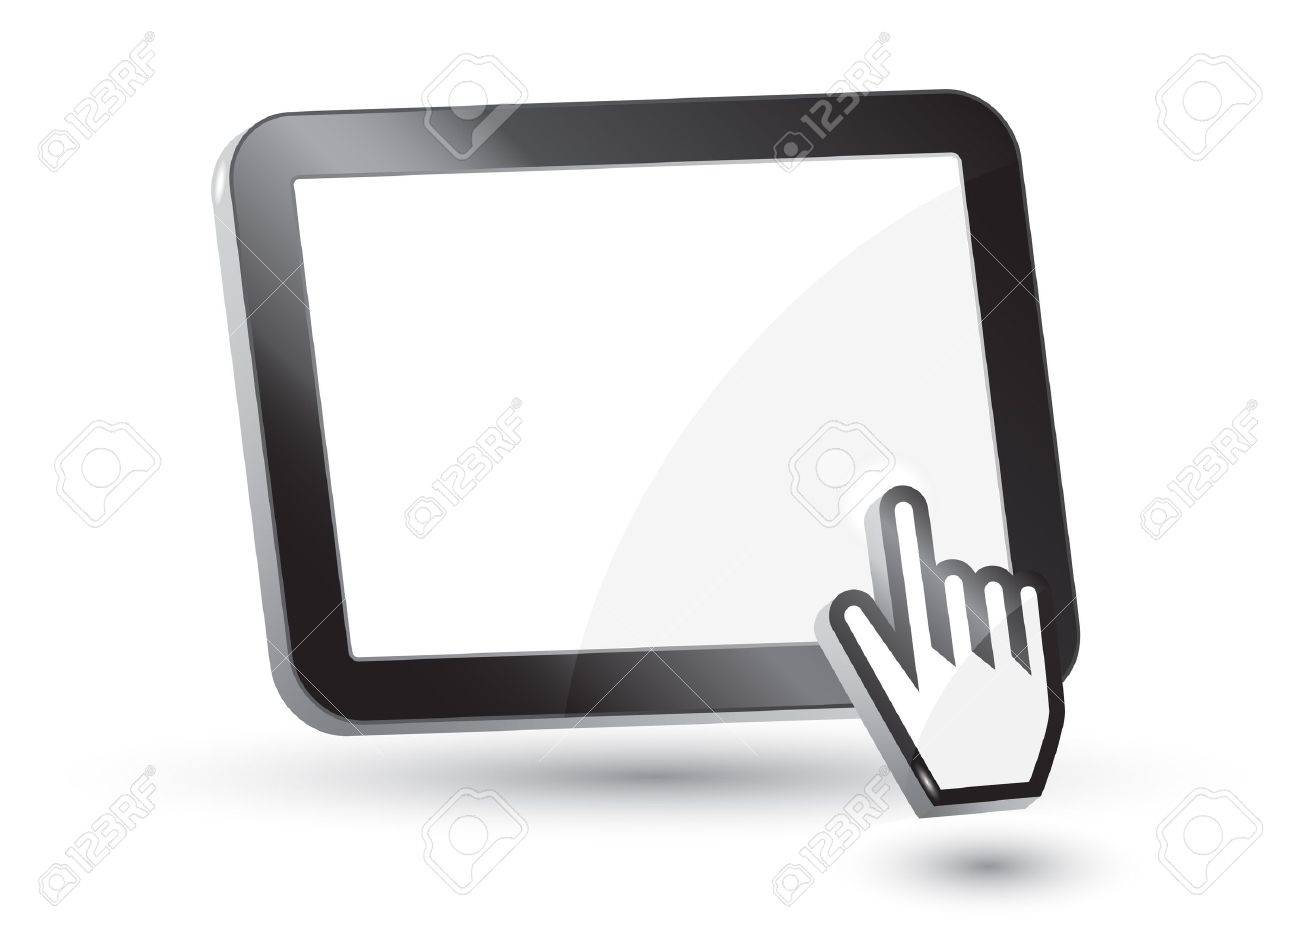 Tablet clipart black and white